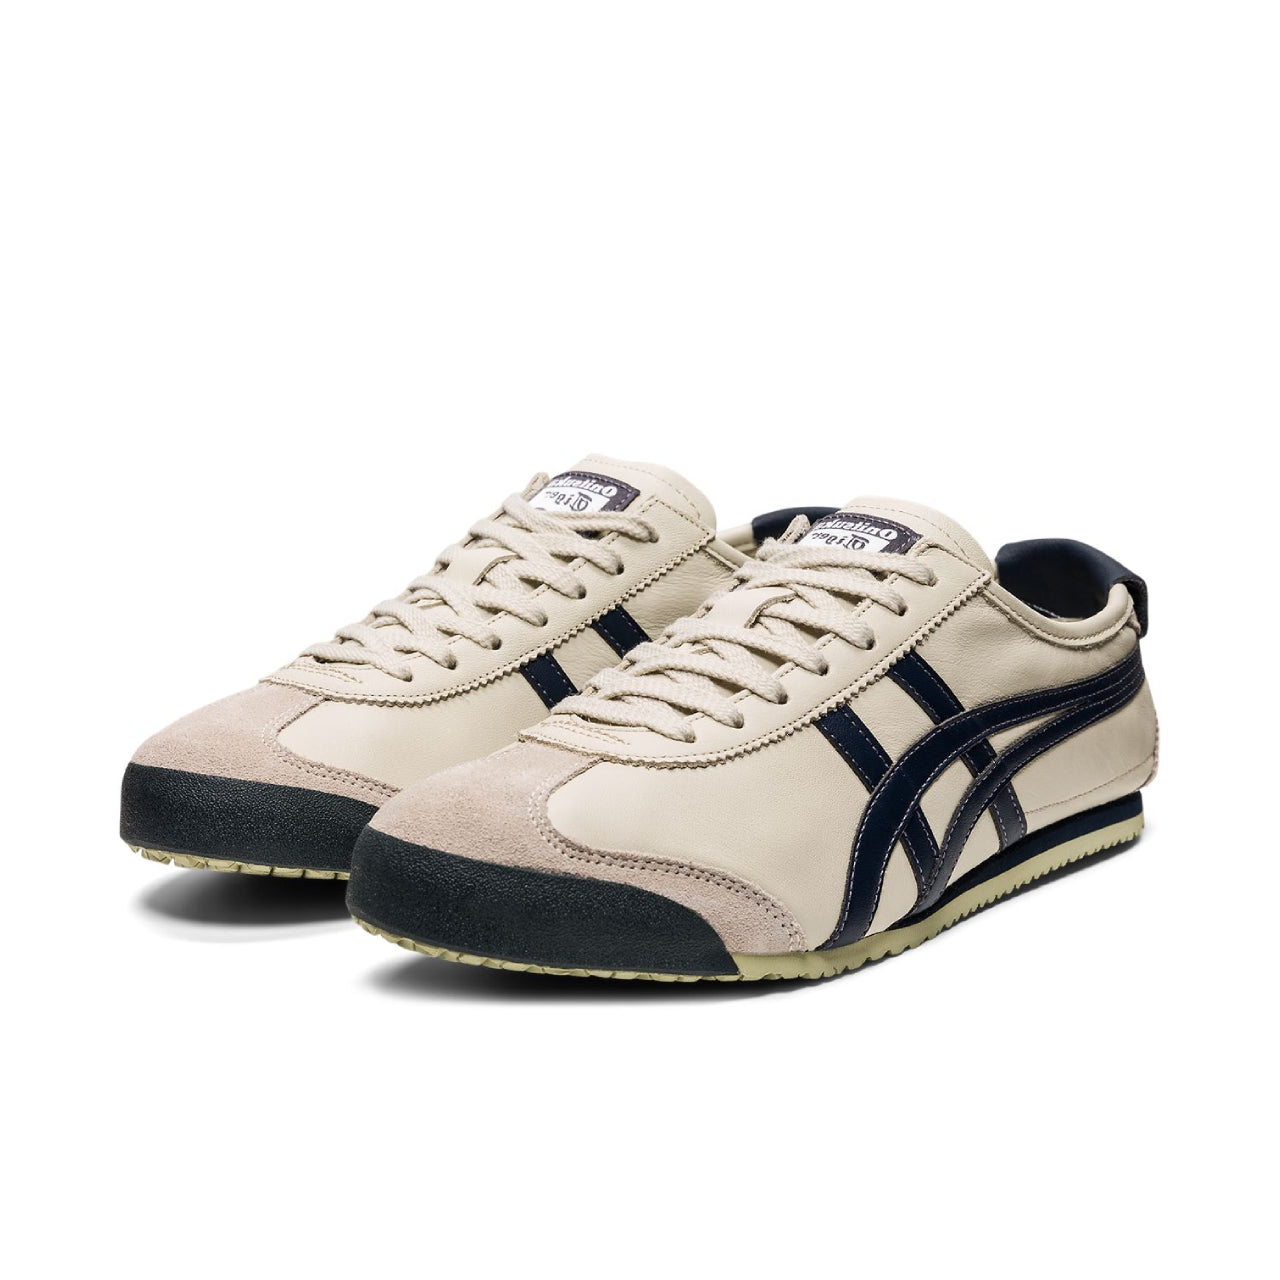 Onitsuka Tiger Mexico 66 Birch Peacoat - 1183C102-200/DL408-1659 - Medial